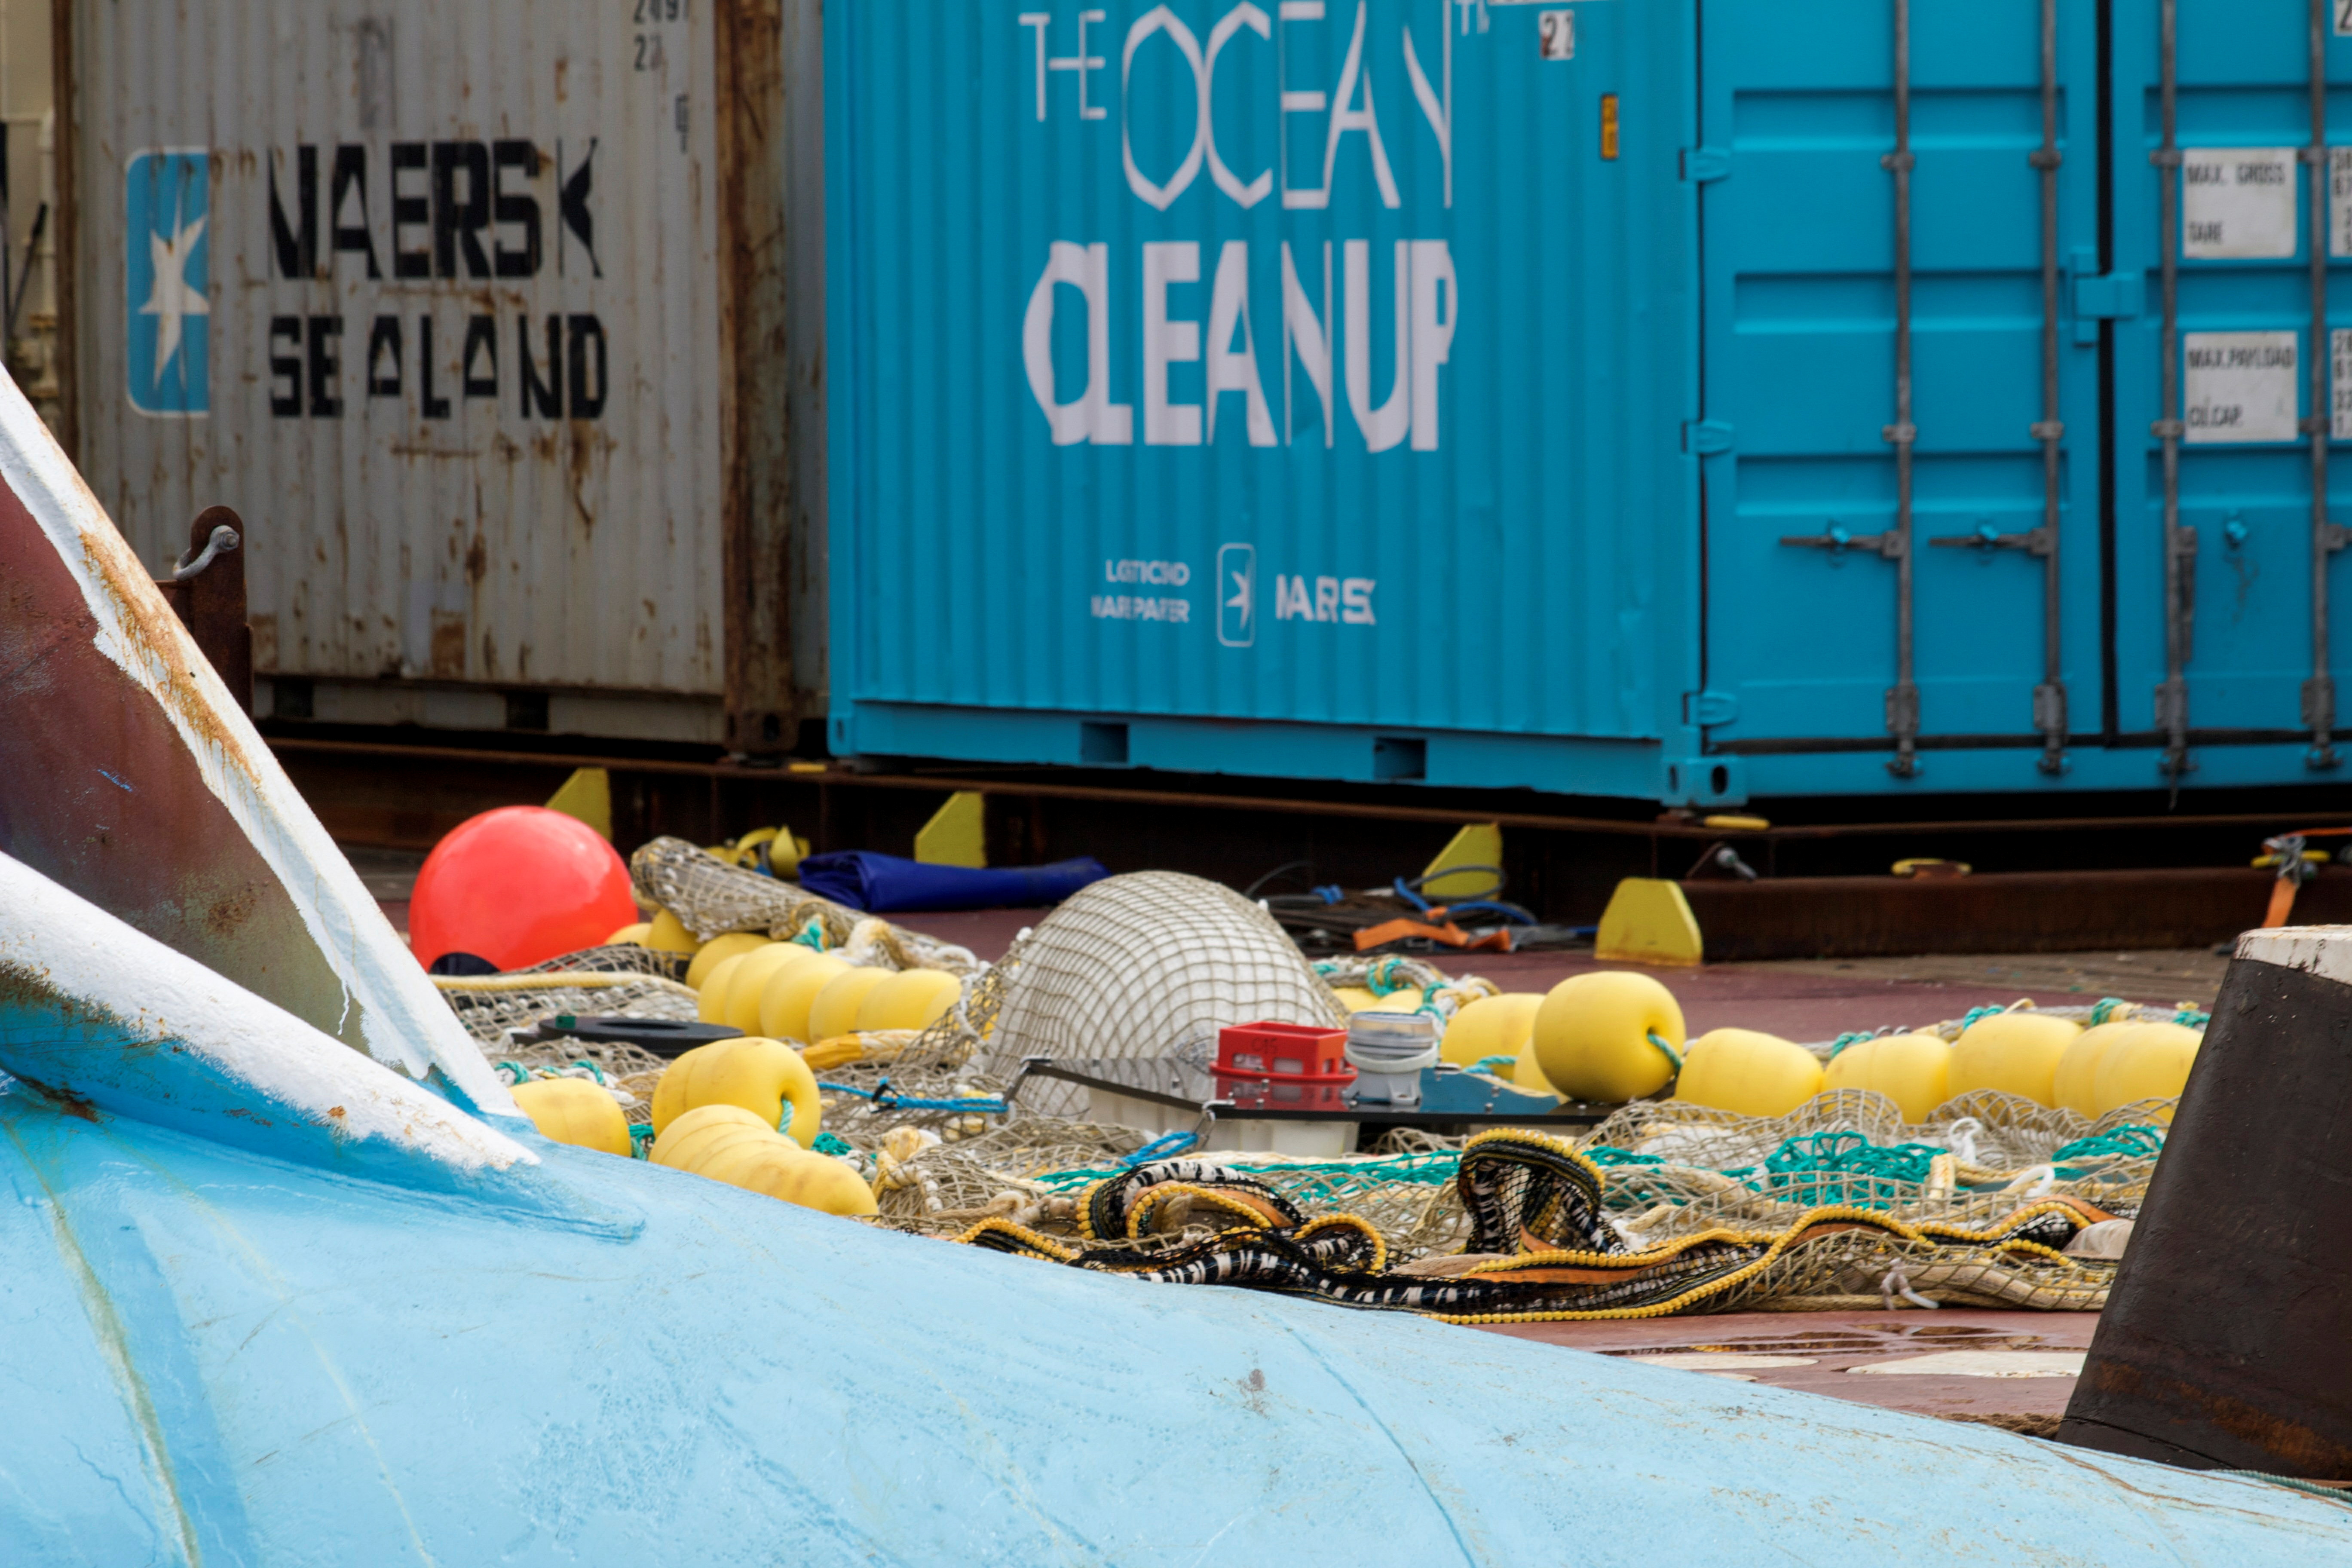 A catchment system used by non-profit the Ocean Cleanup to remove plastic from the ocean is seen on the deck of a vessel in Victoria, Canada, September 8, 2021. REUTERS/Gloria Dickie